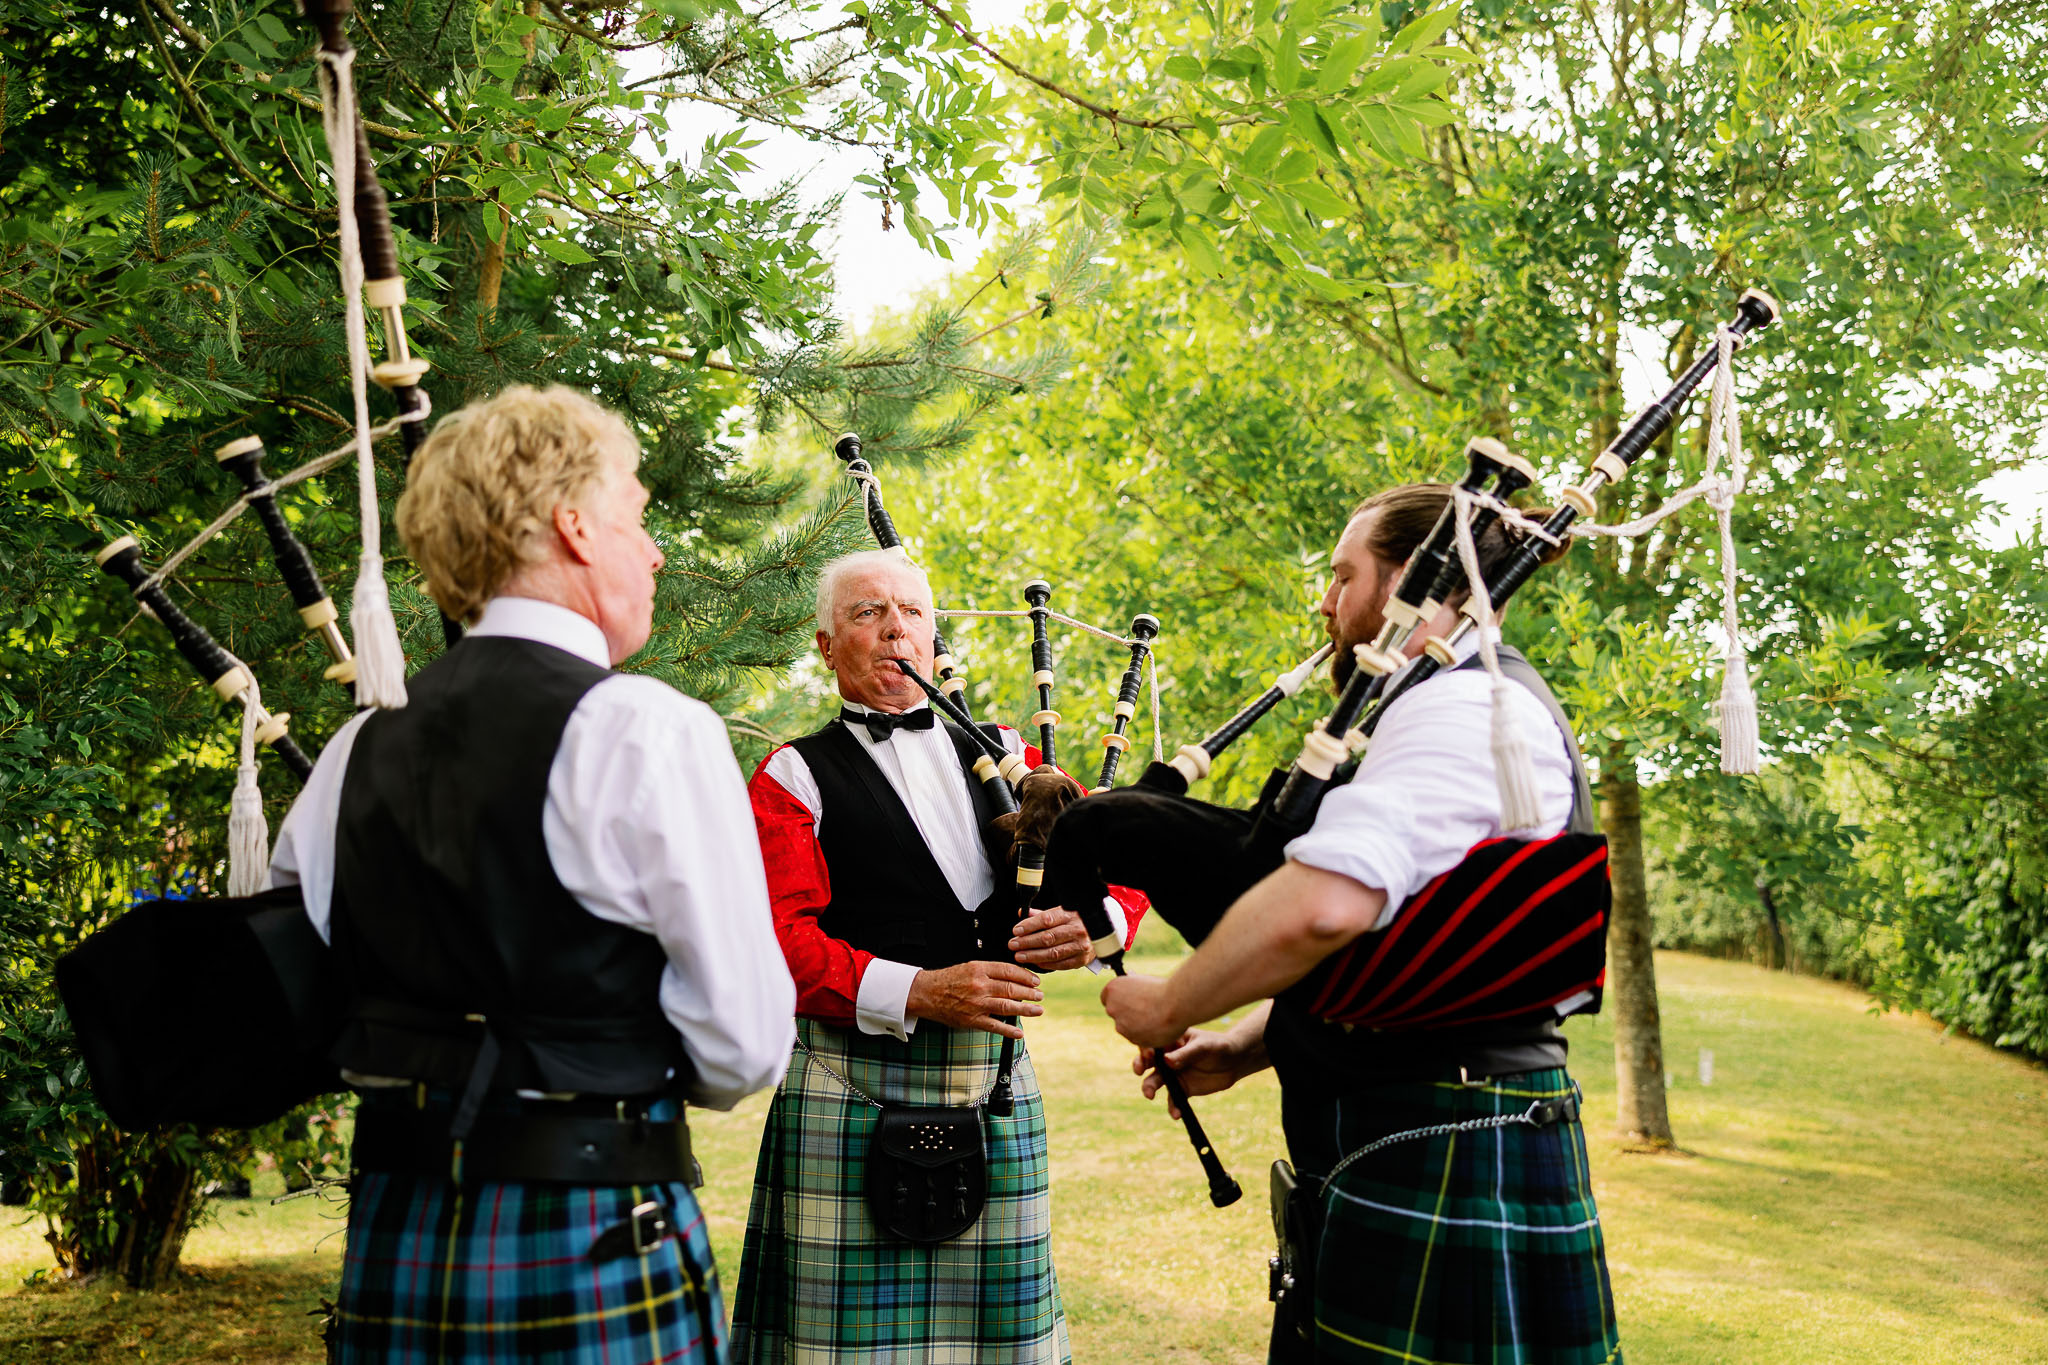 Wedding entertainment with bagpipes